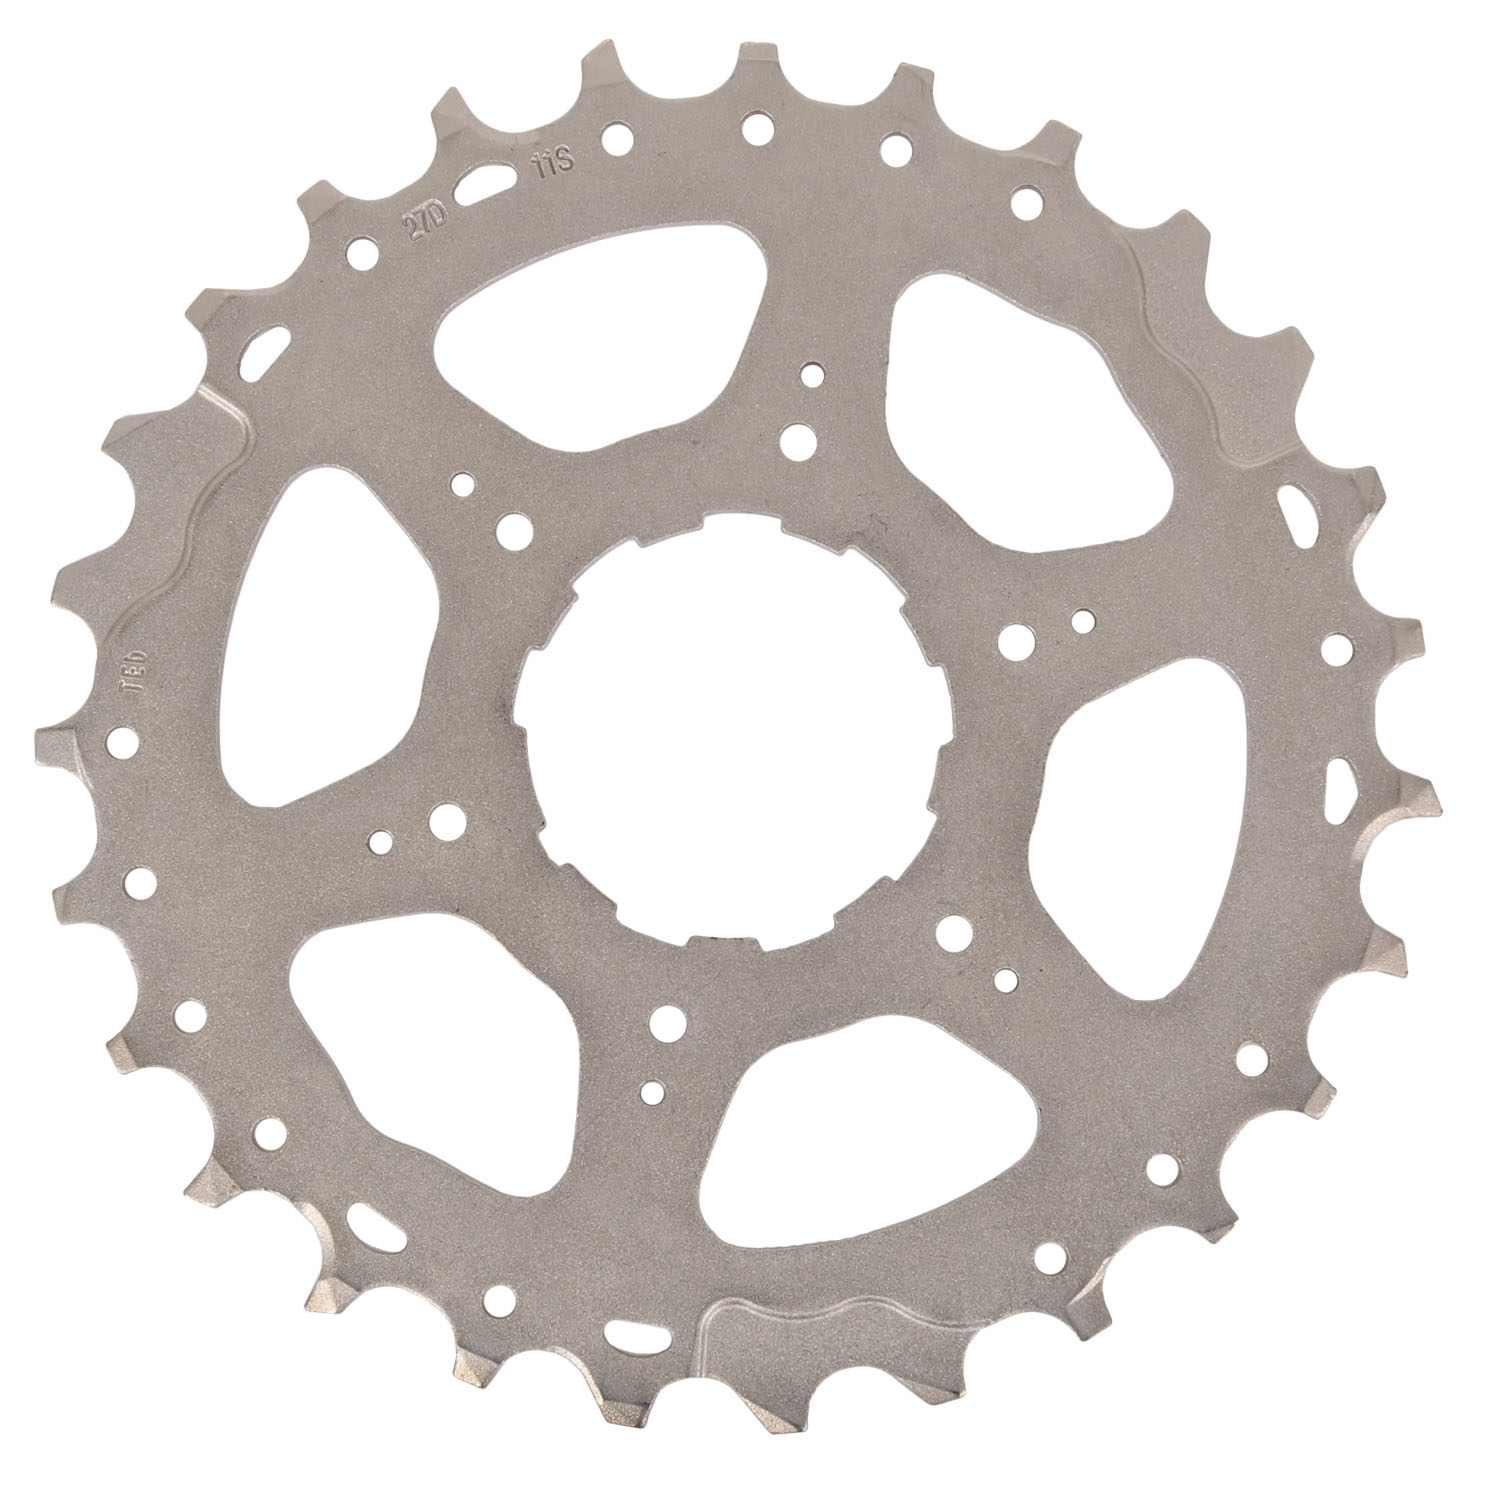 Picture of Shimano Sprocket for Deore XT / SLX 11-speed Cassette - 27 teeth for 11-40 (Y1VN27000) - CS-M7000